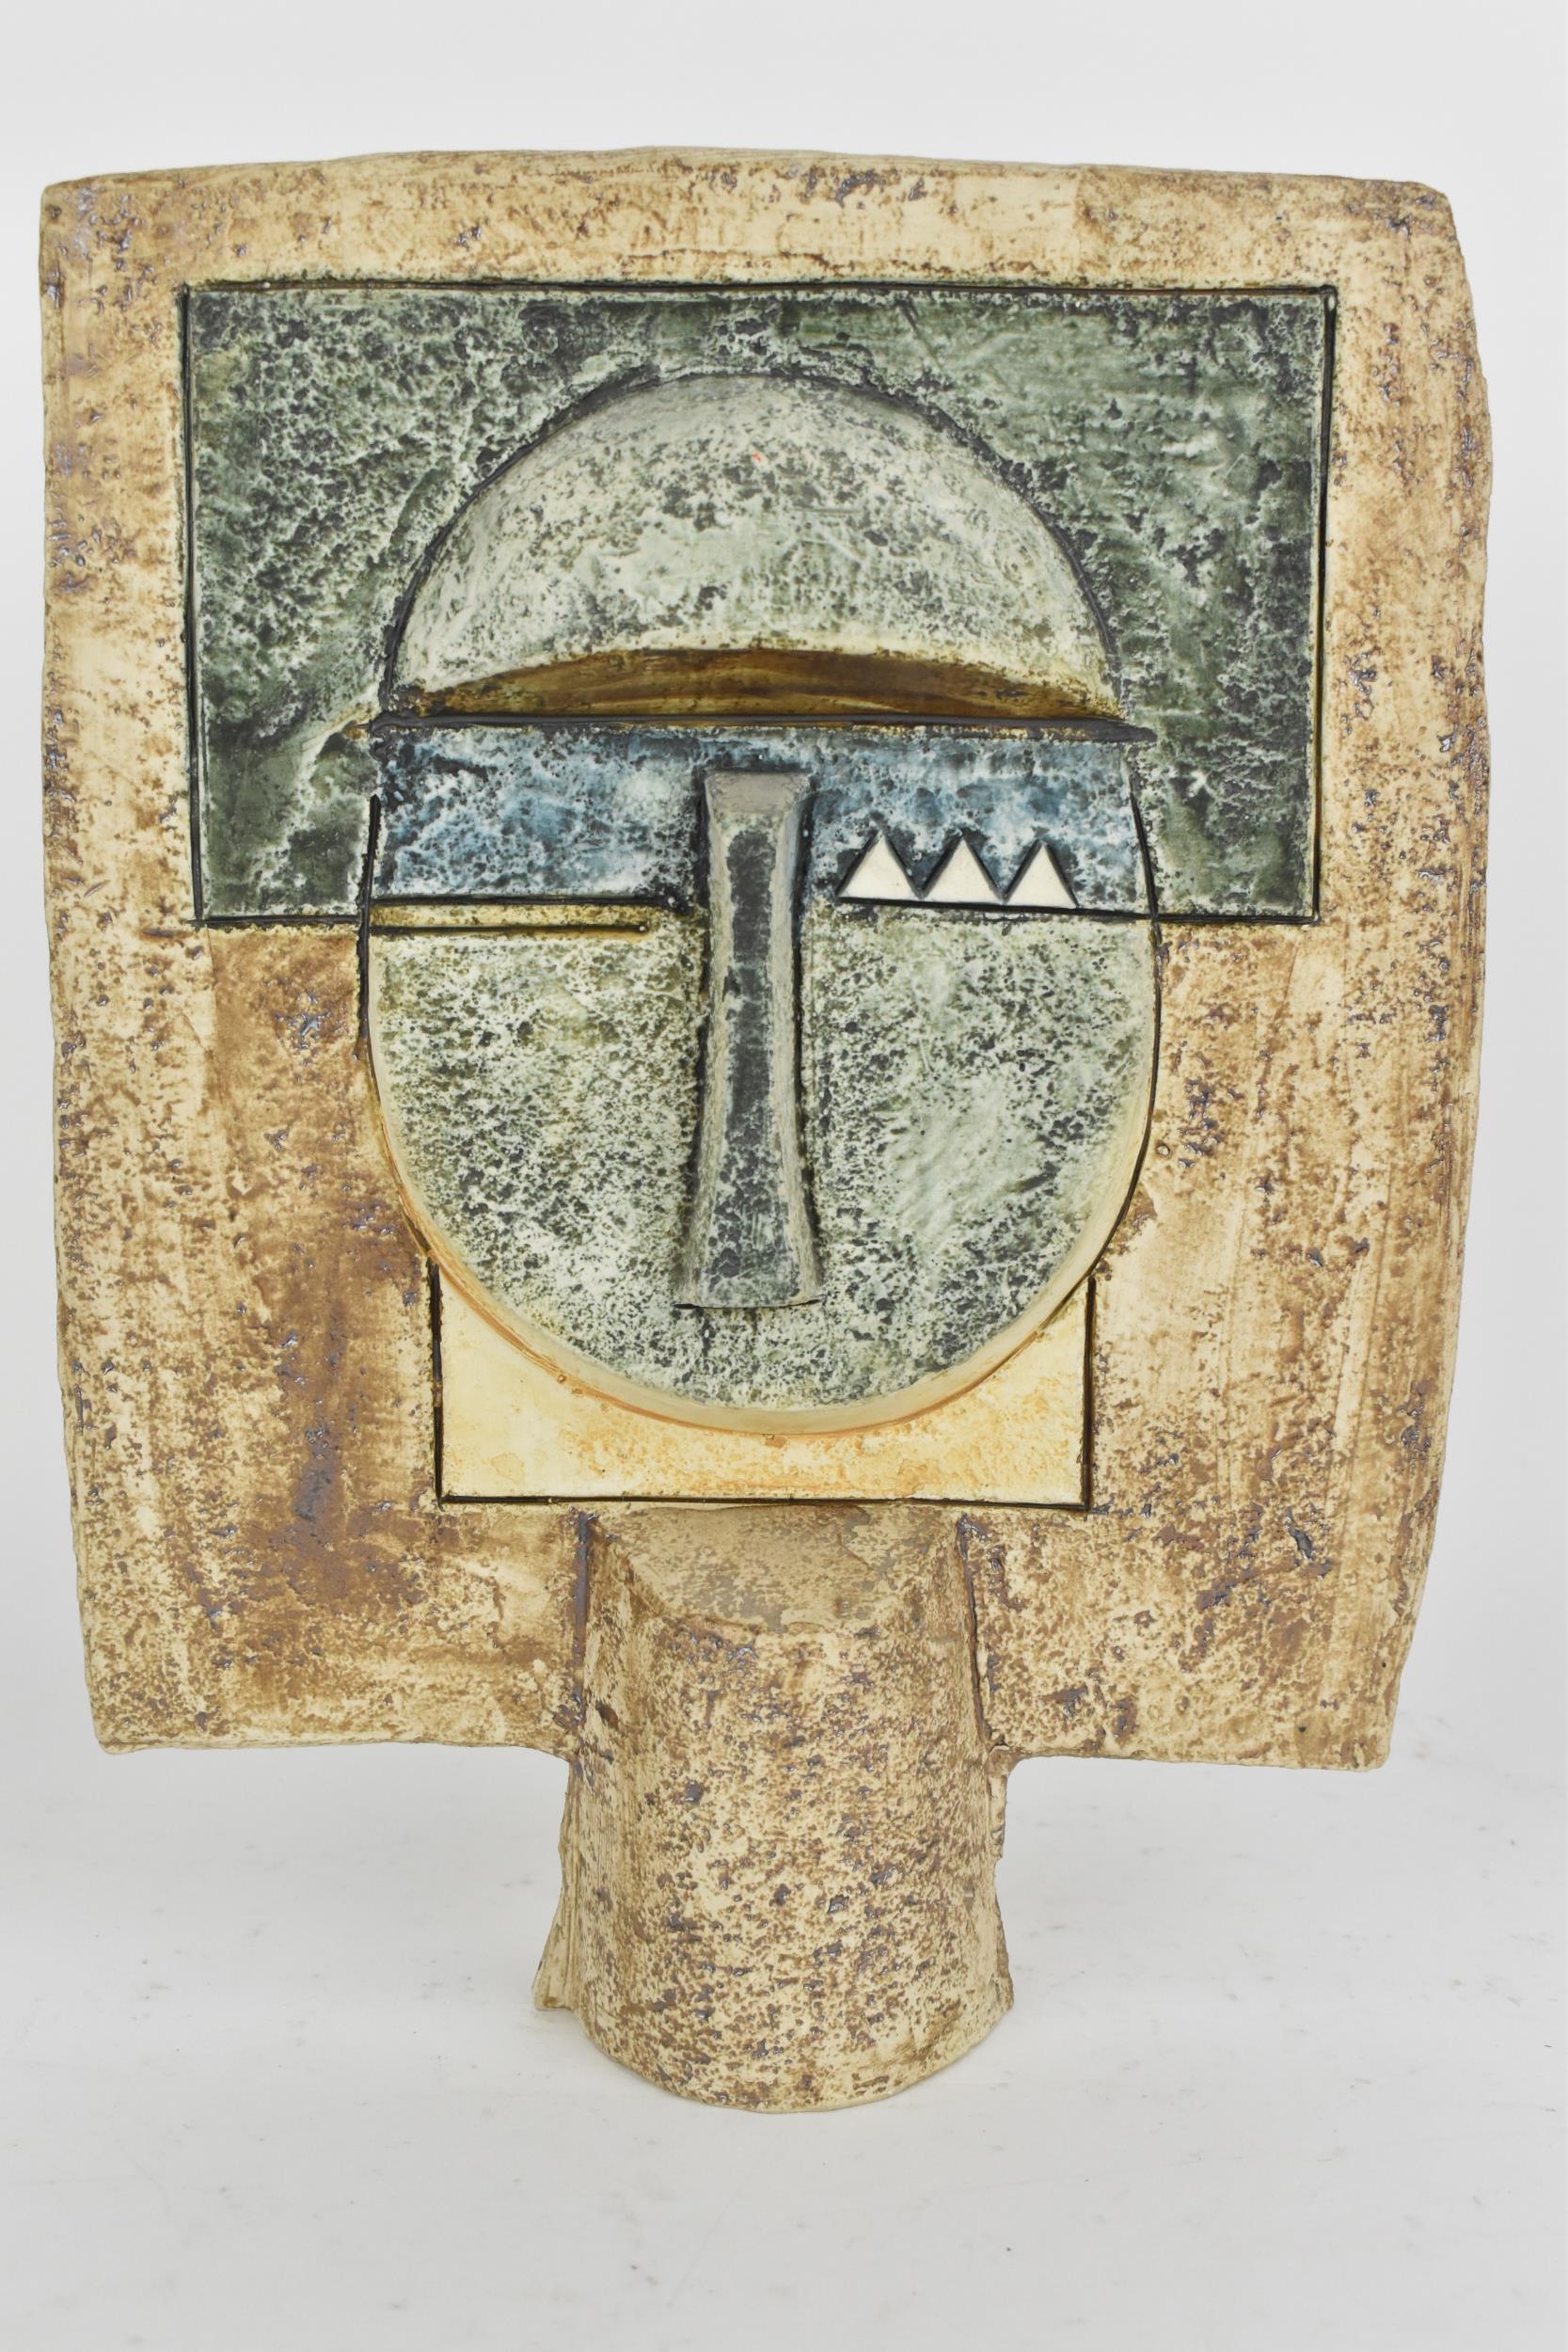 A Troika mask with incised and textured 'Aztec' decoration, monogrammed AW for Annette Walters circa - Image 3 of 7